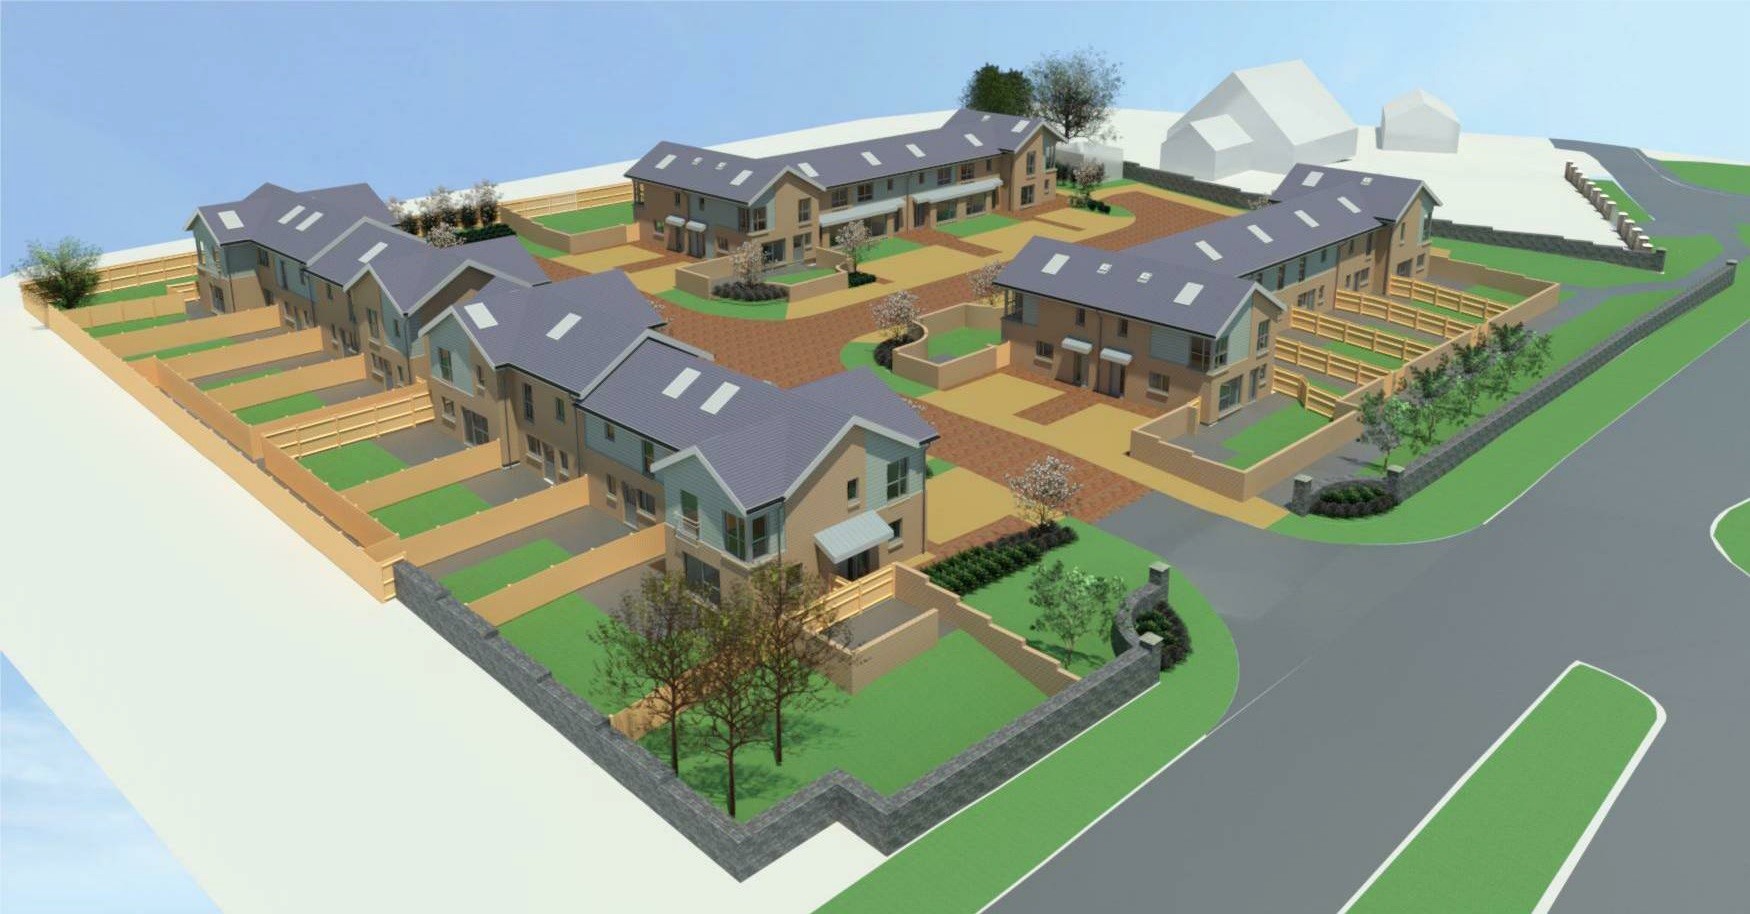 New council homes planned on former Larbert school site